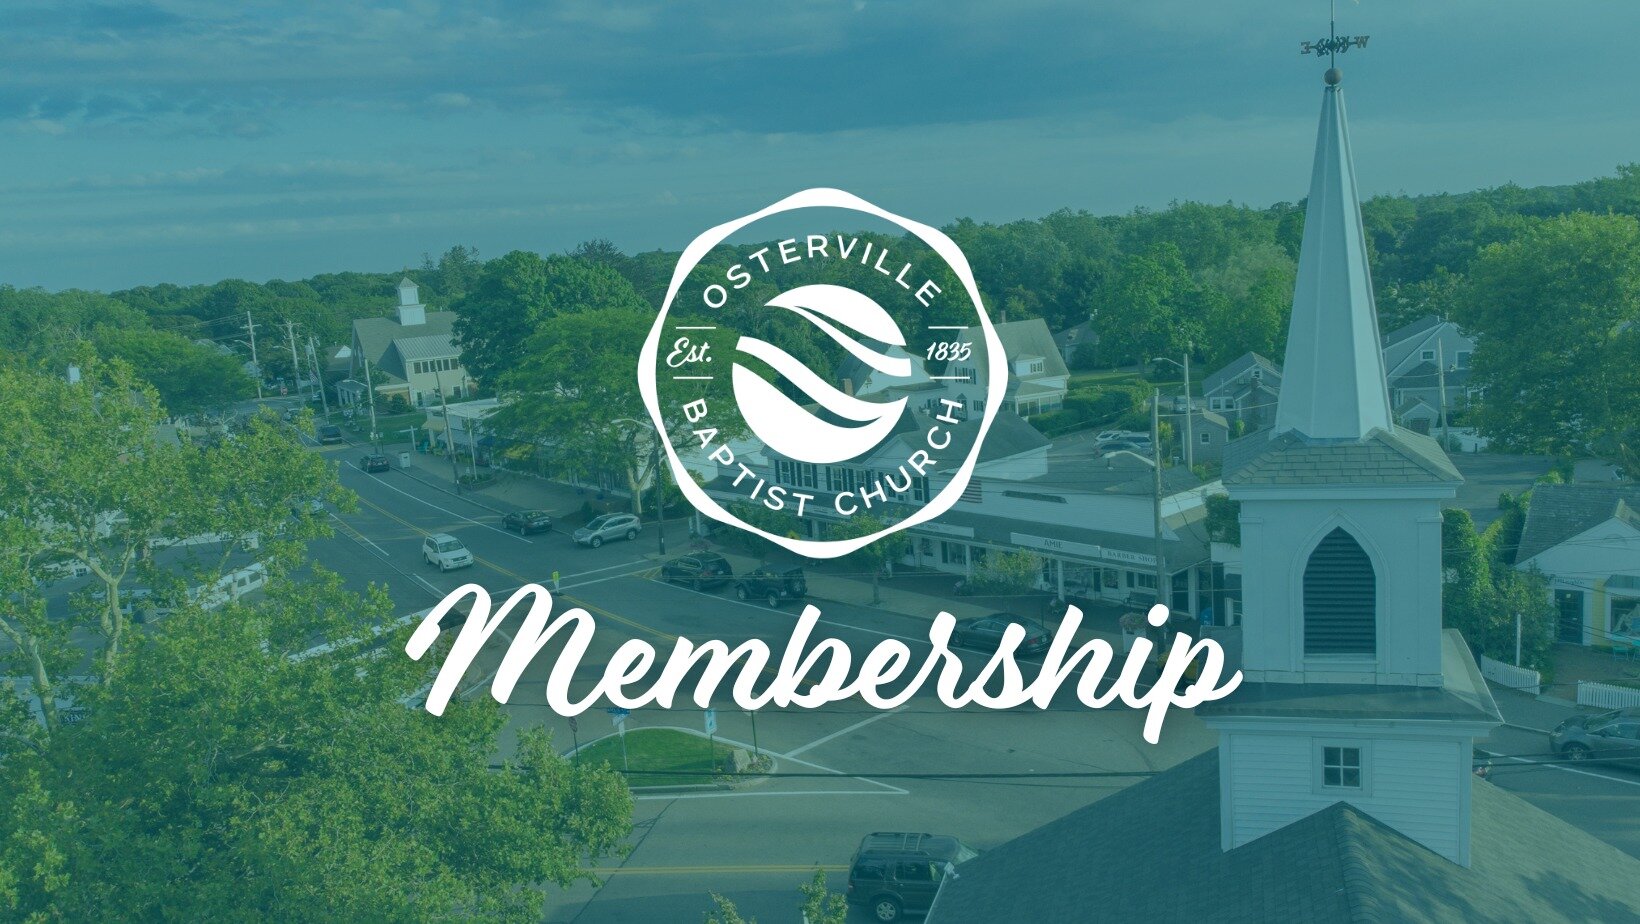 OBC Membership Classes
September 17th &amp; 24th | 8:30AM | OBC

If you have been interested in becoming a member of OBC, please join us in the next membership classes that will be held this September!

Sign up by RSVPing below, or at the sign up tab